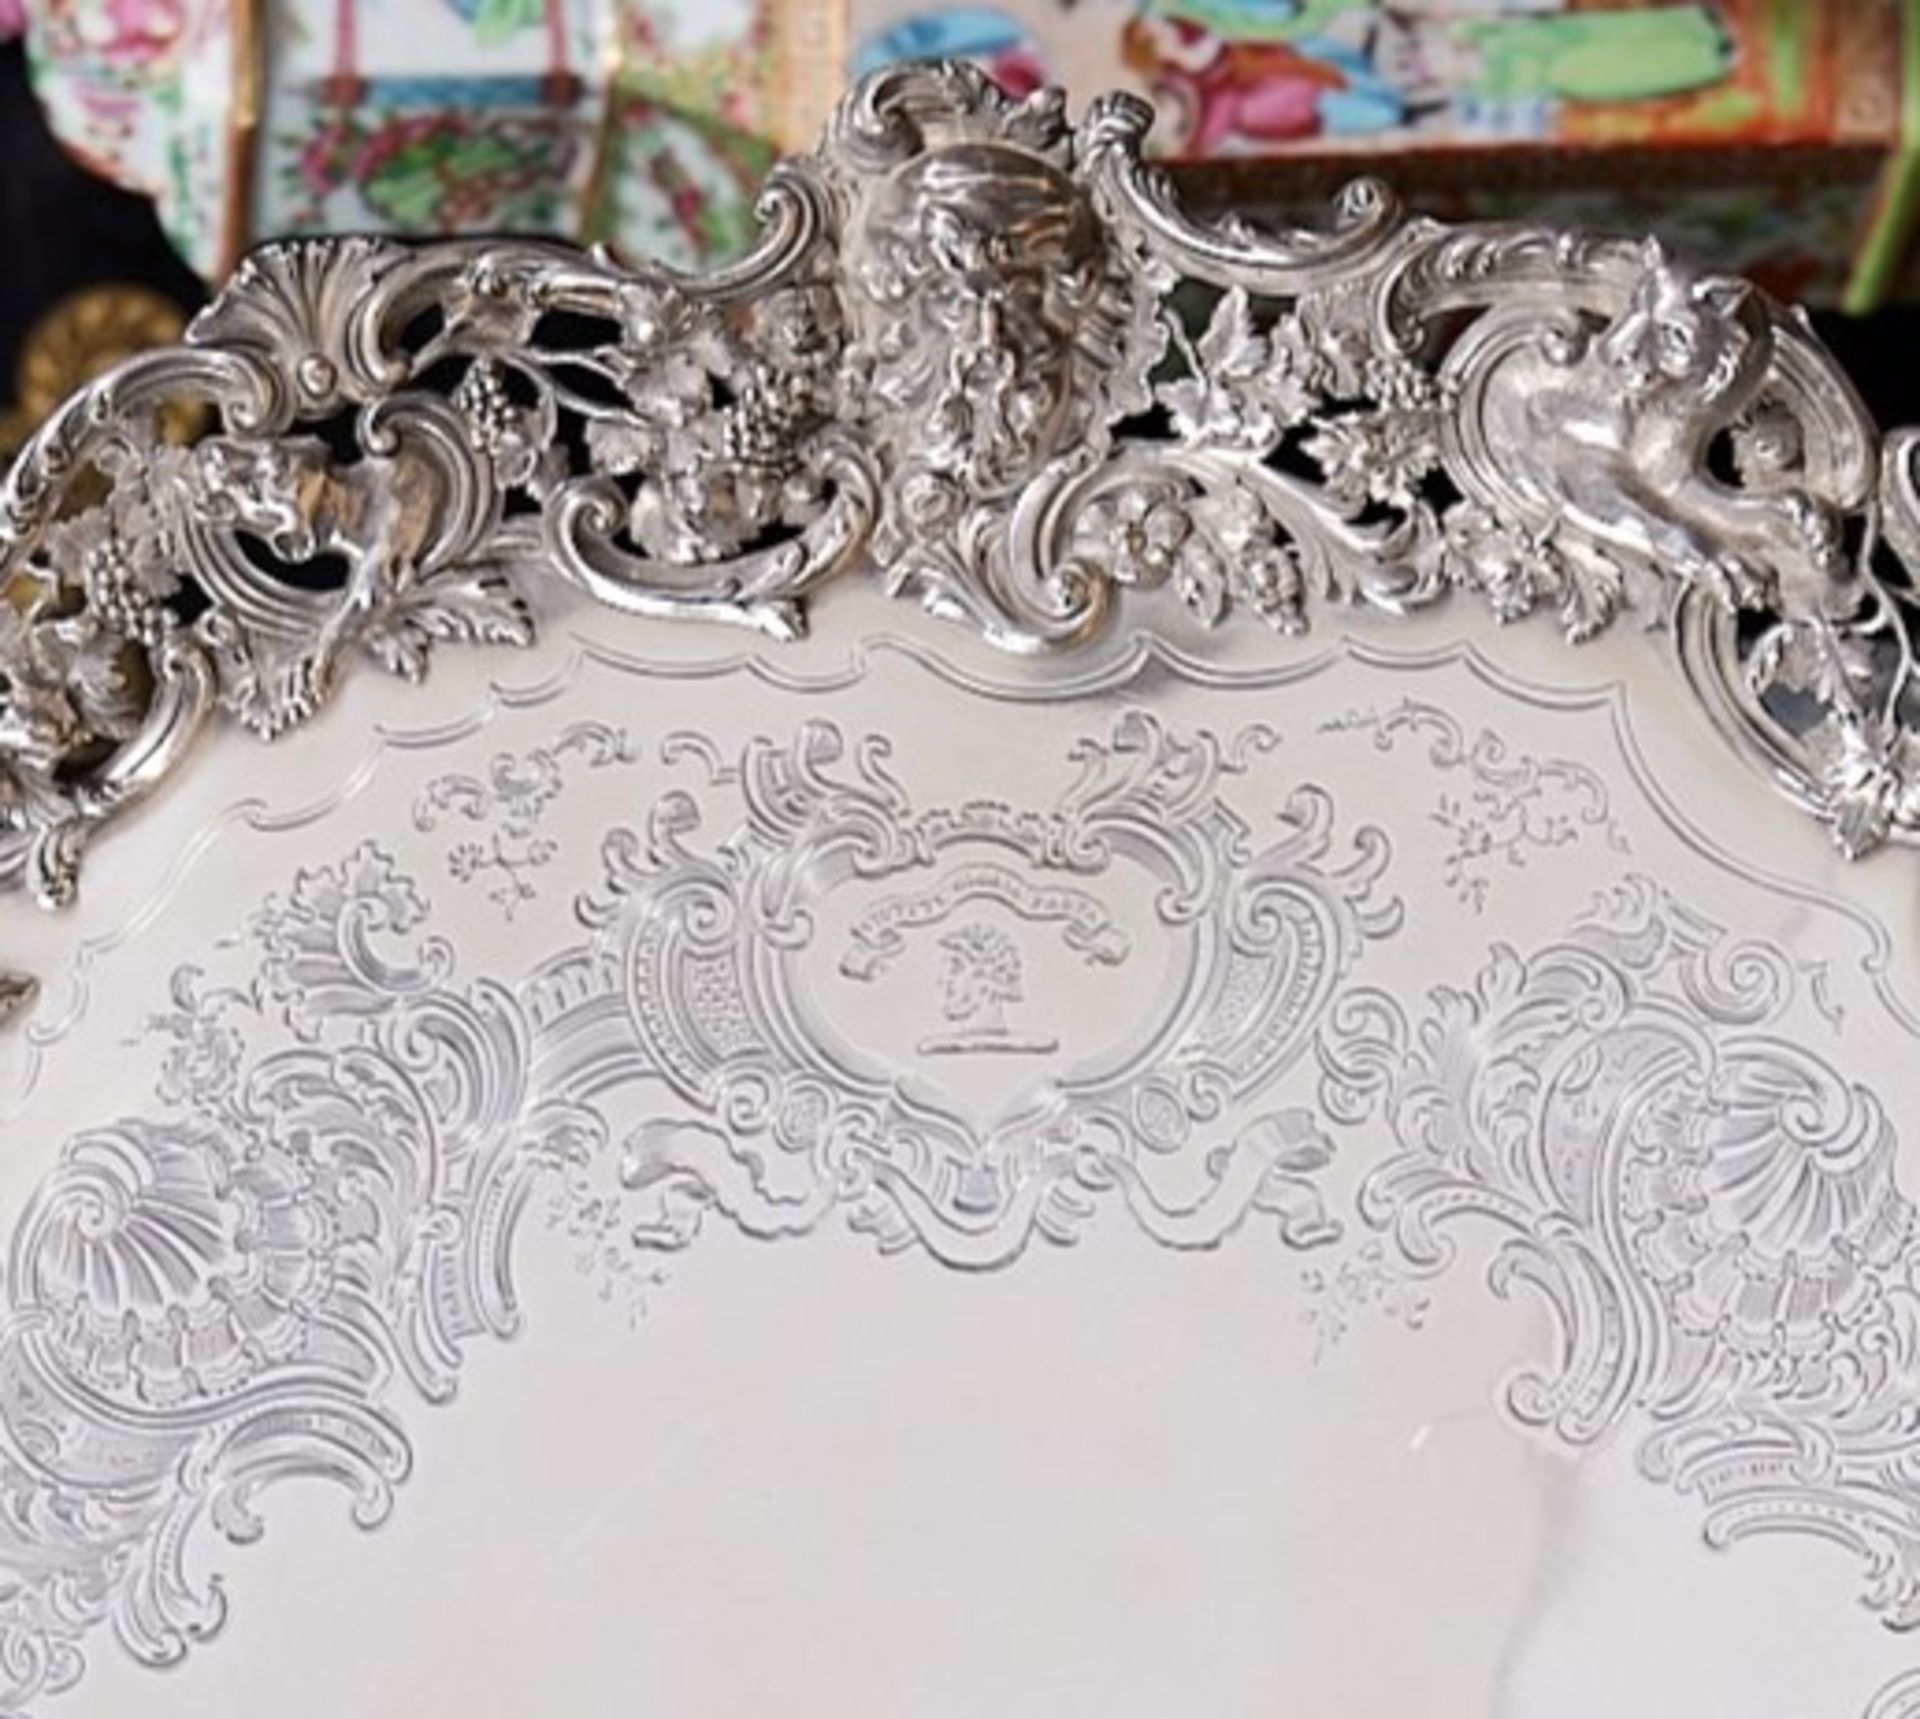 A MASSIVE STERLING SILVER SALVER BY ROBERT W. SMITH OF DUBLIN , 1846 - Image 3 of 21